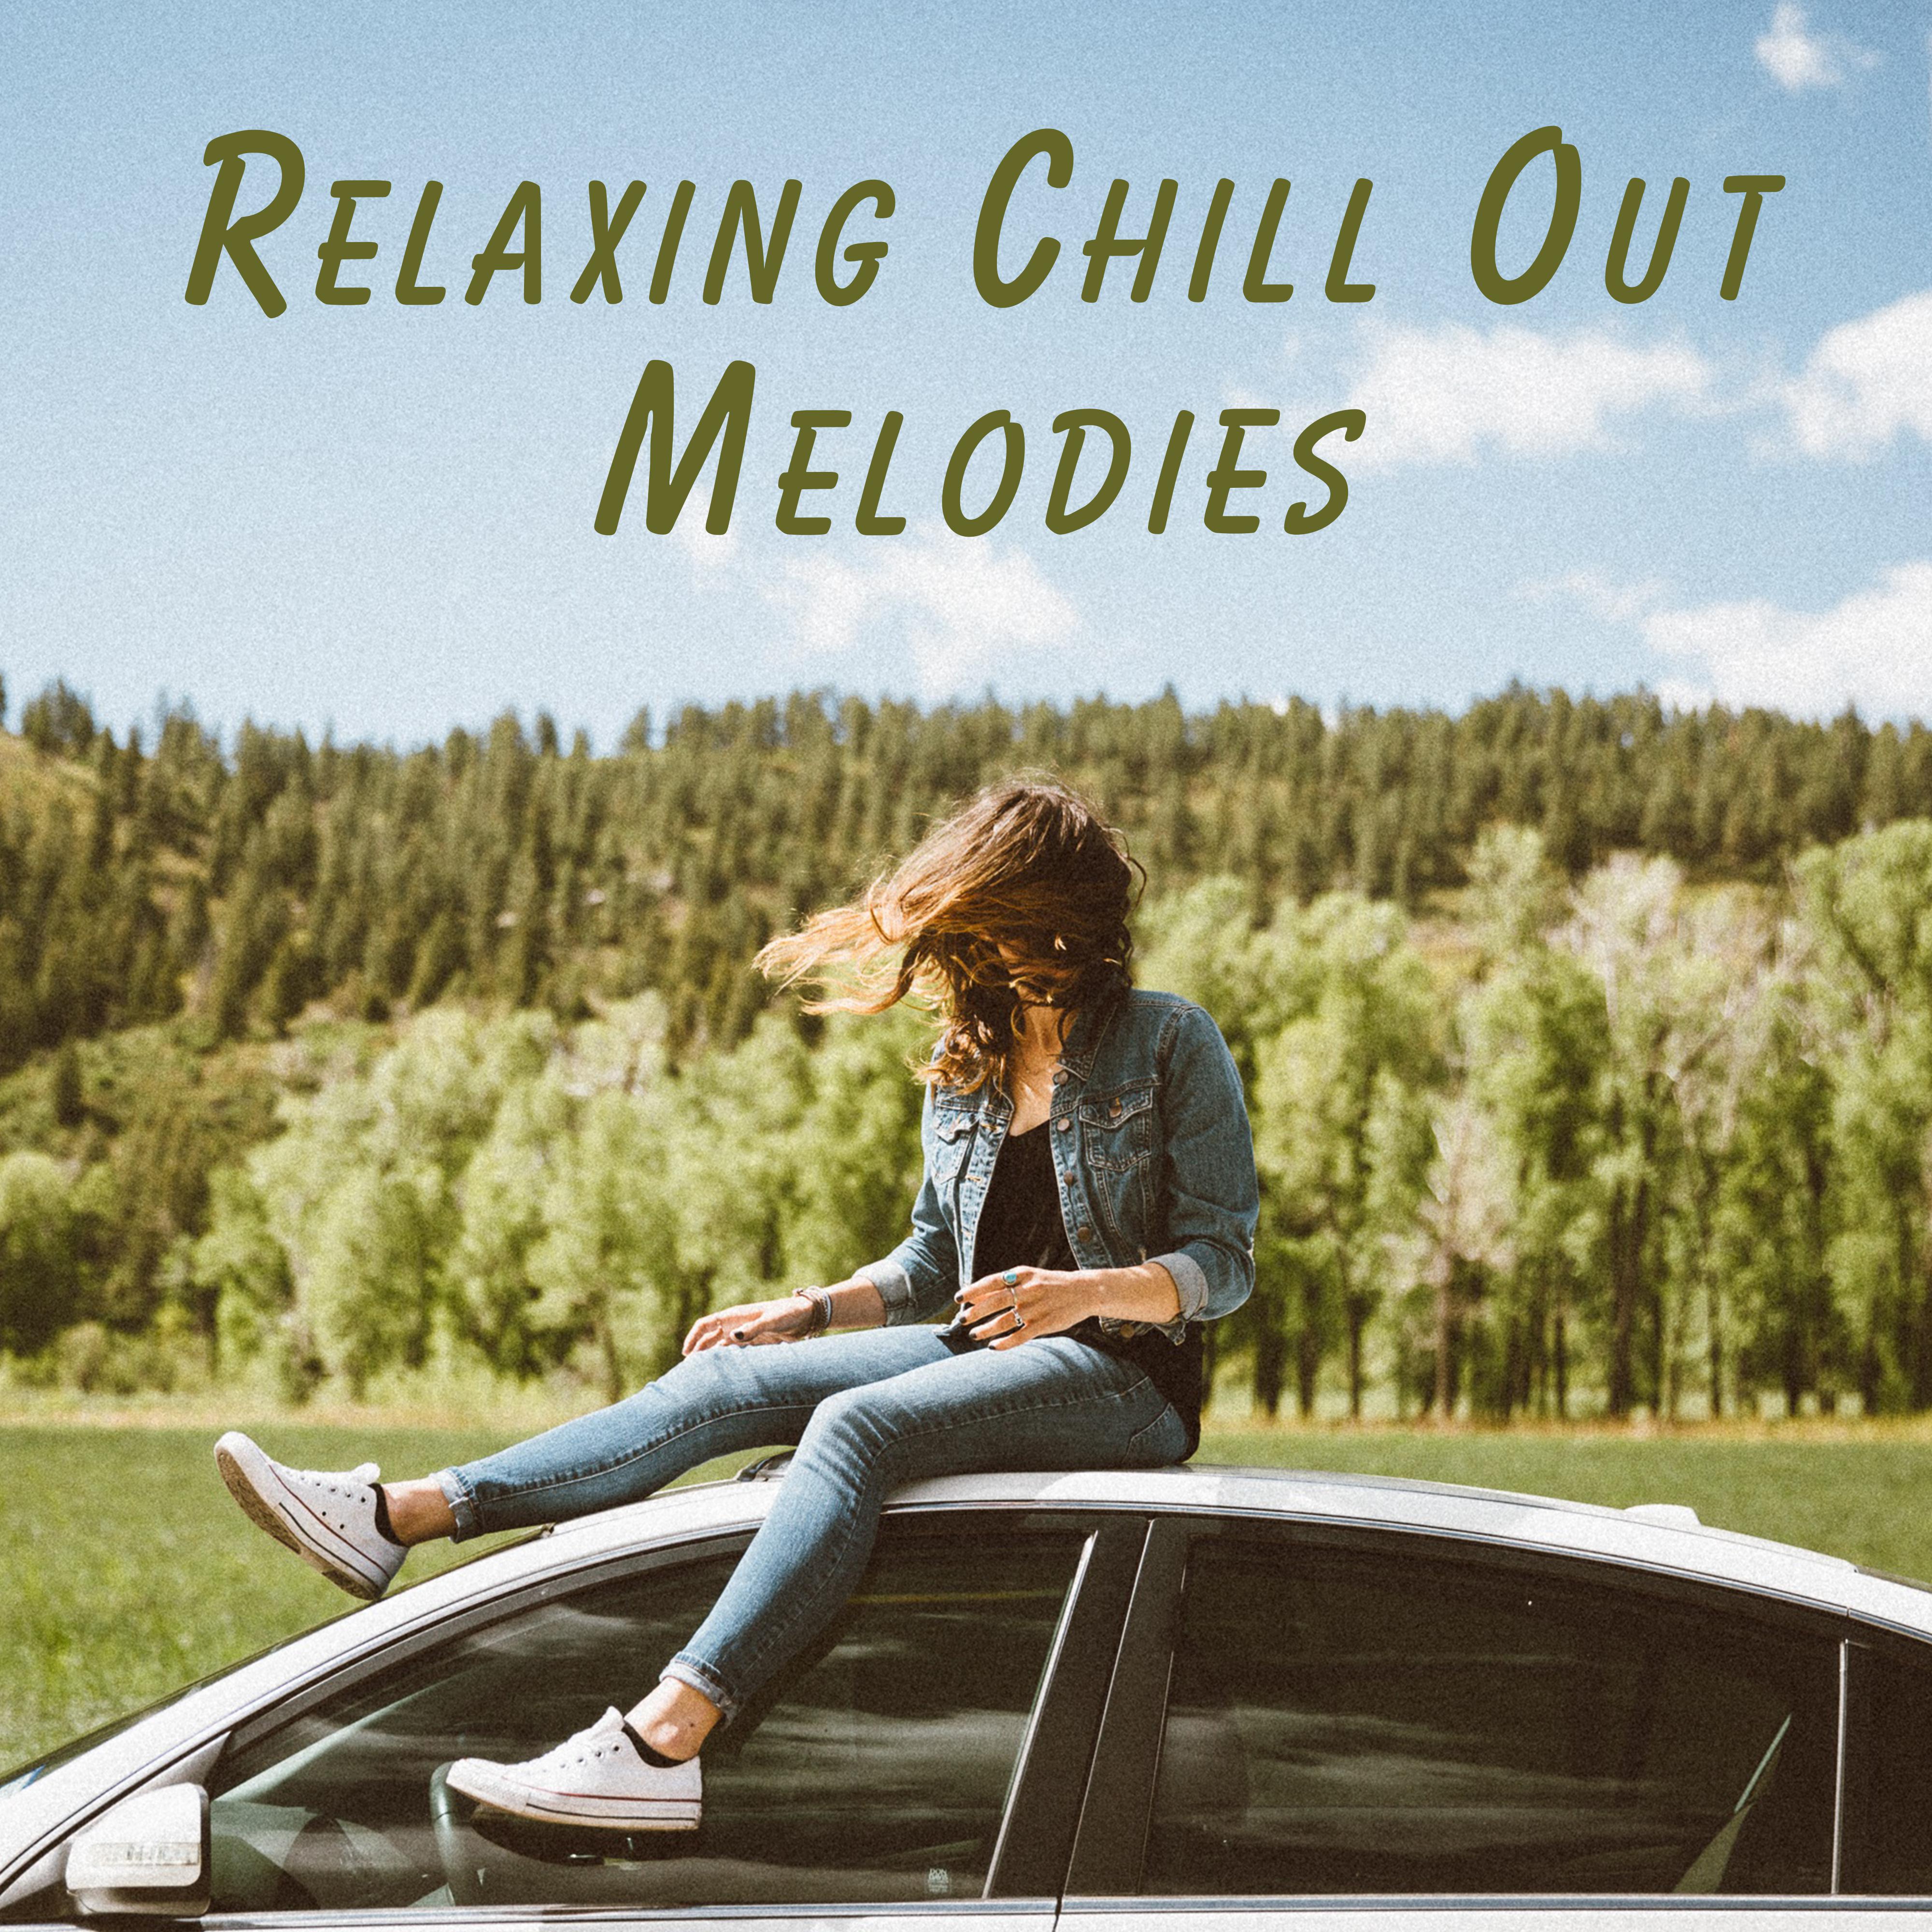 Relaxing Chill Out Melodies – Stress Relief, Holiday Music, Summer Vibes, Rest on Tropical Island